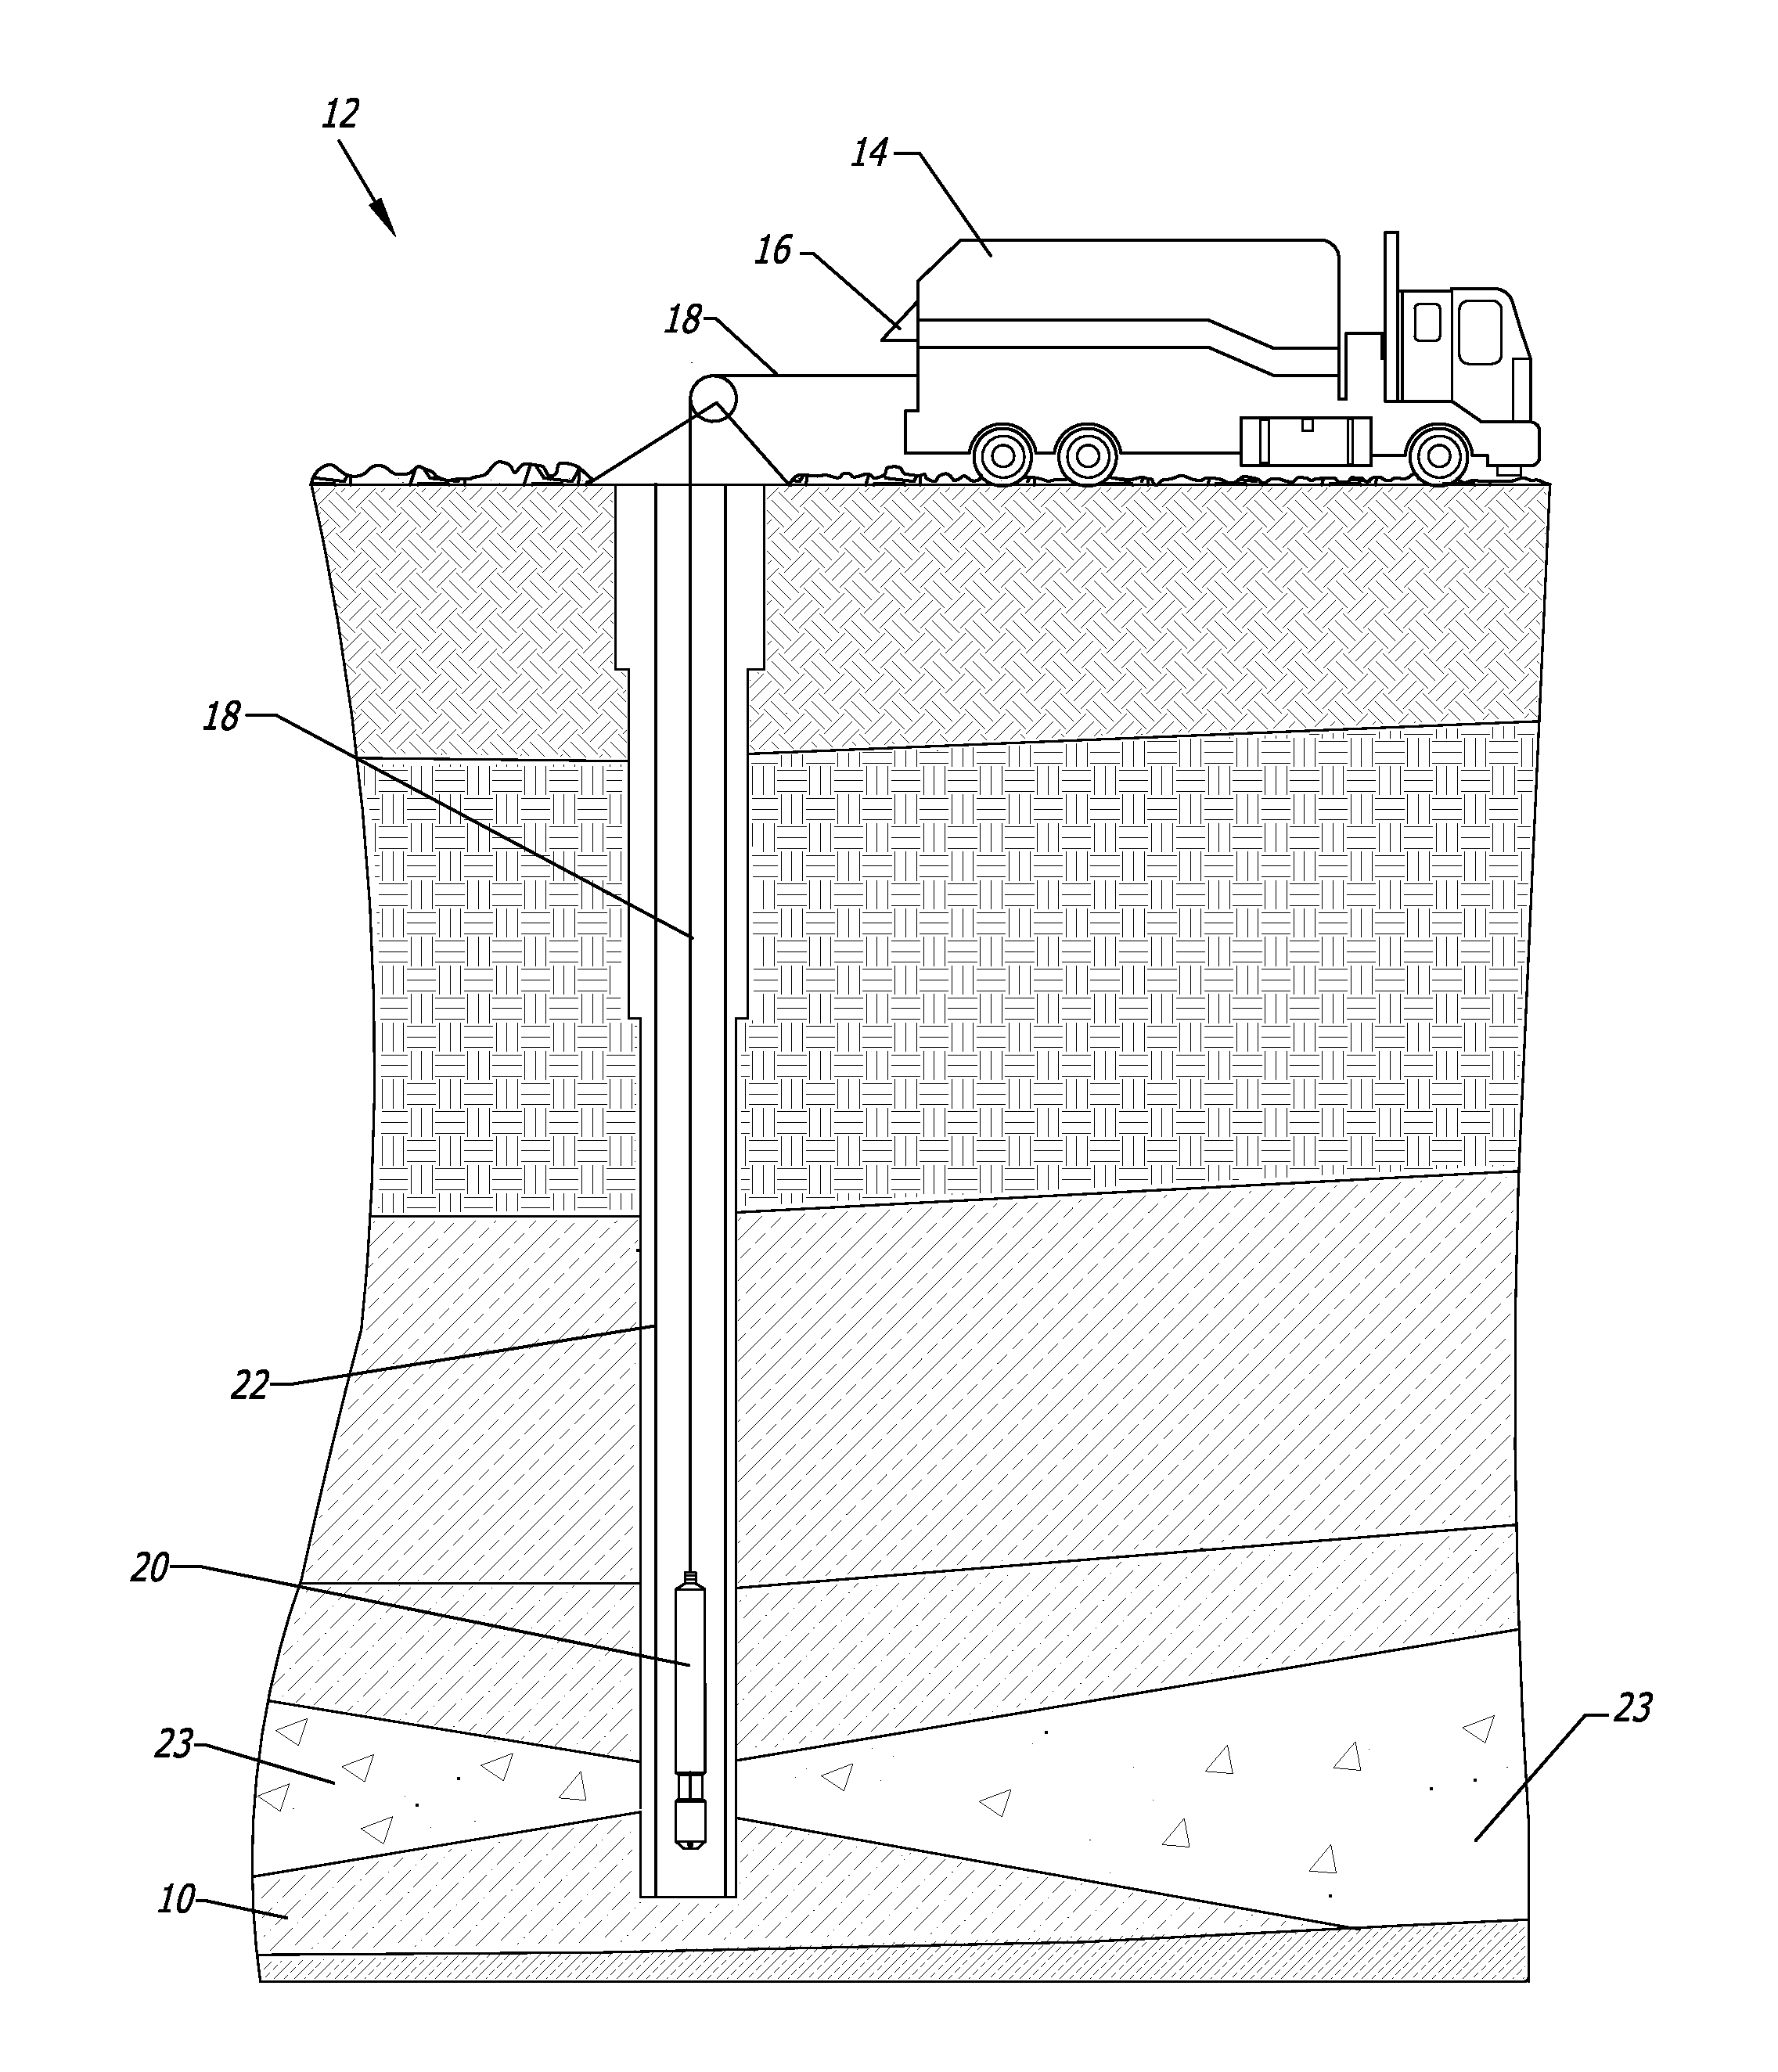 Plasma source for generating nonlinear, wide-band, periodic, directed, elastic oscillations and a system and method for stimulating wells, deposits and boreholes using the plasma source